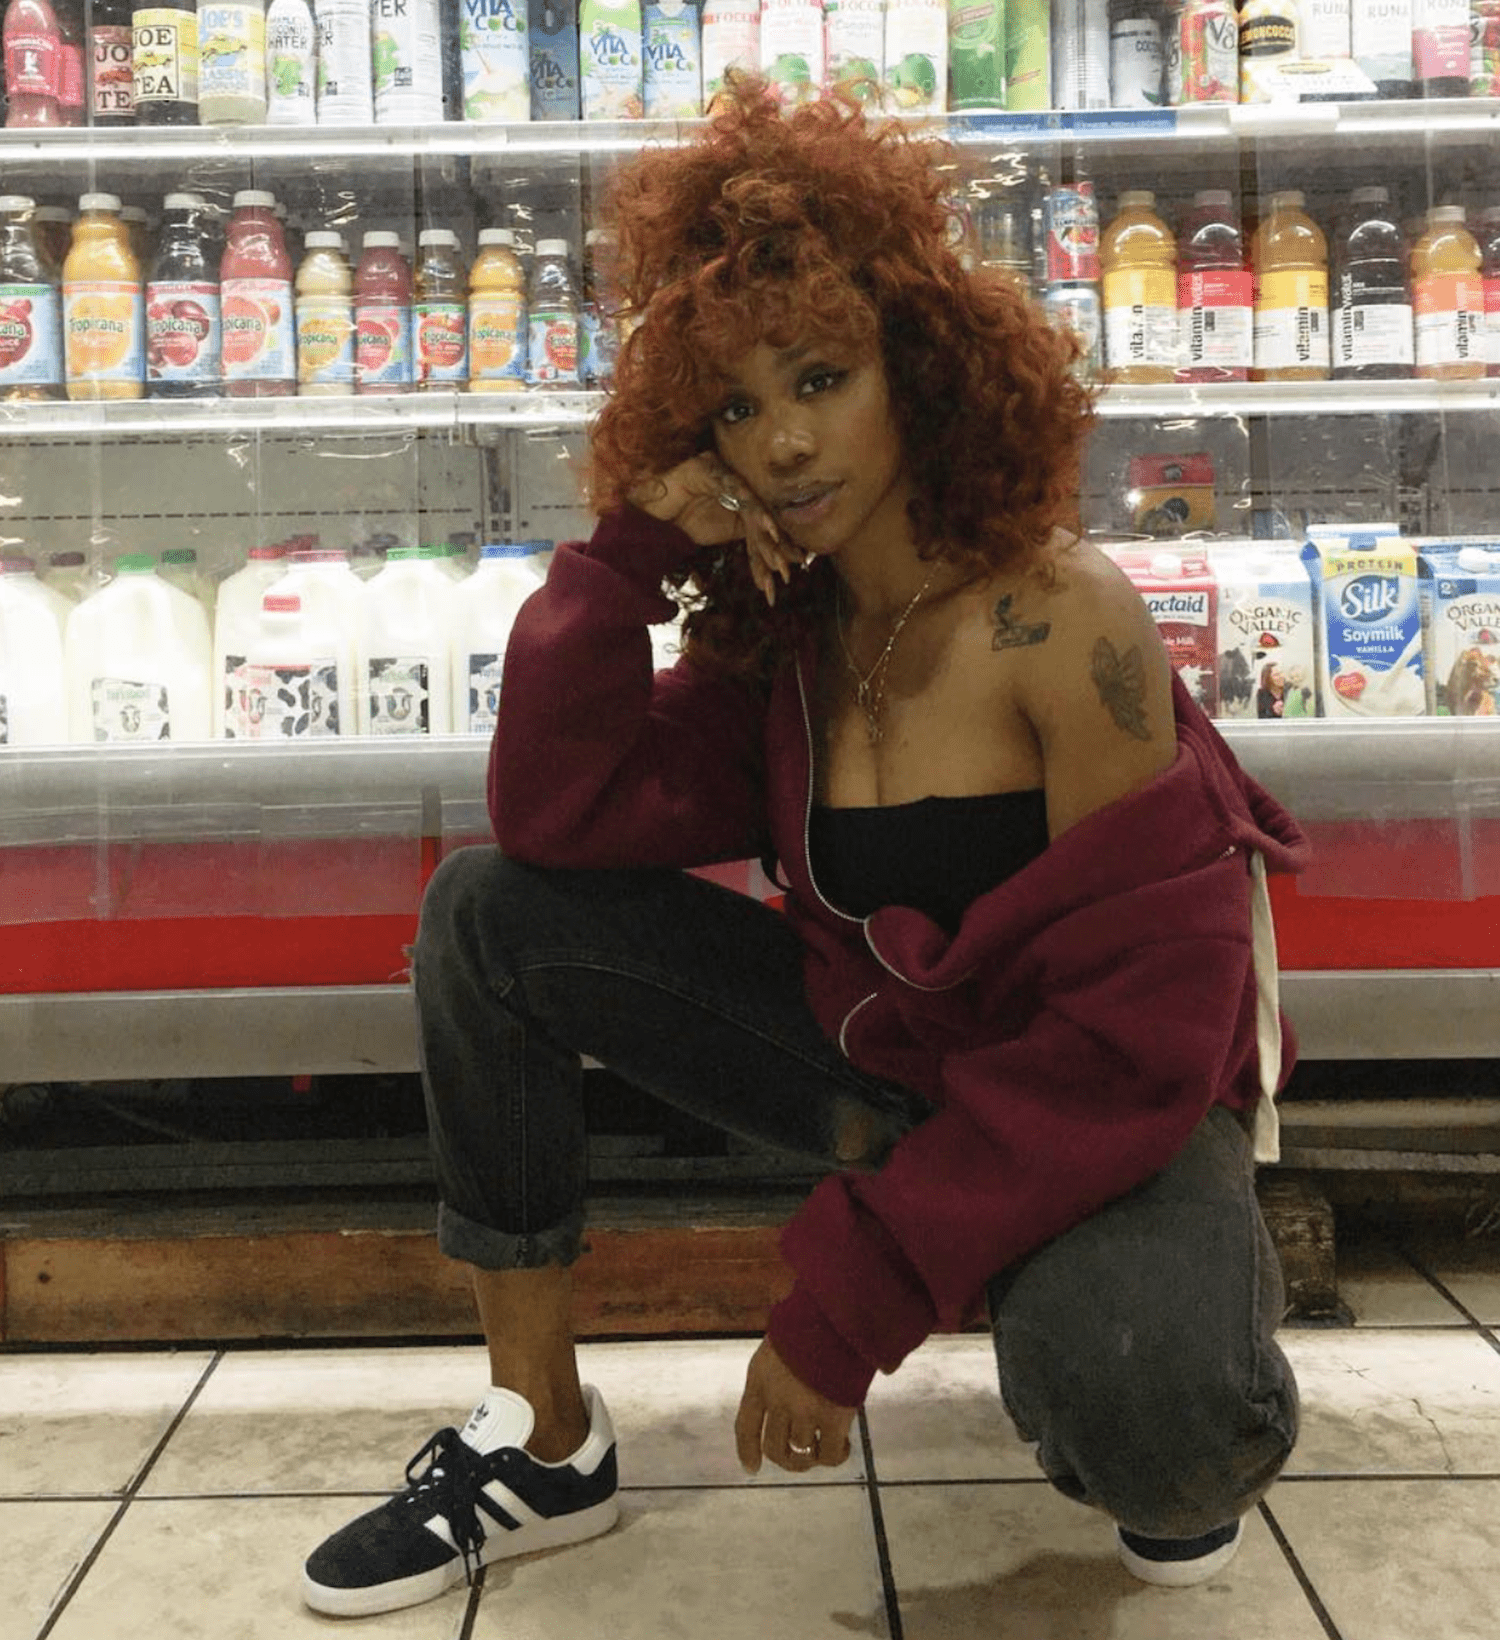 SZA SQUATS DOWN IN A BODEGA MARKET TO POSE FOR A PHOTO